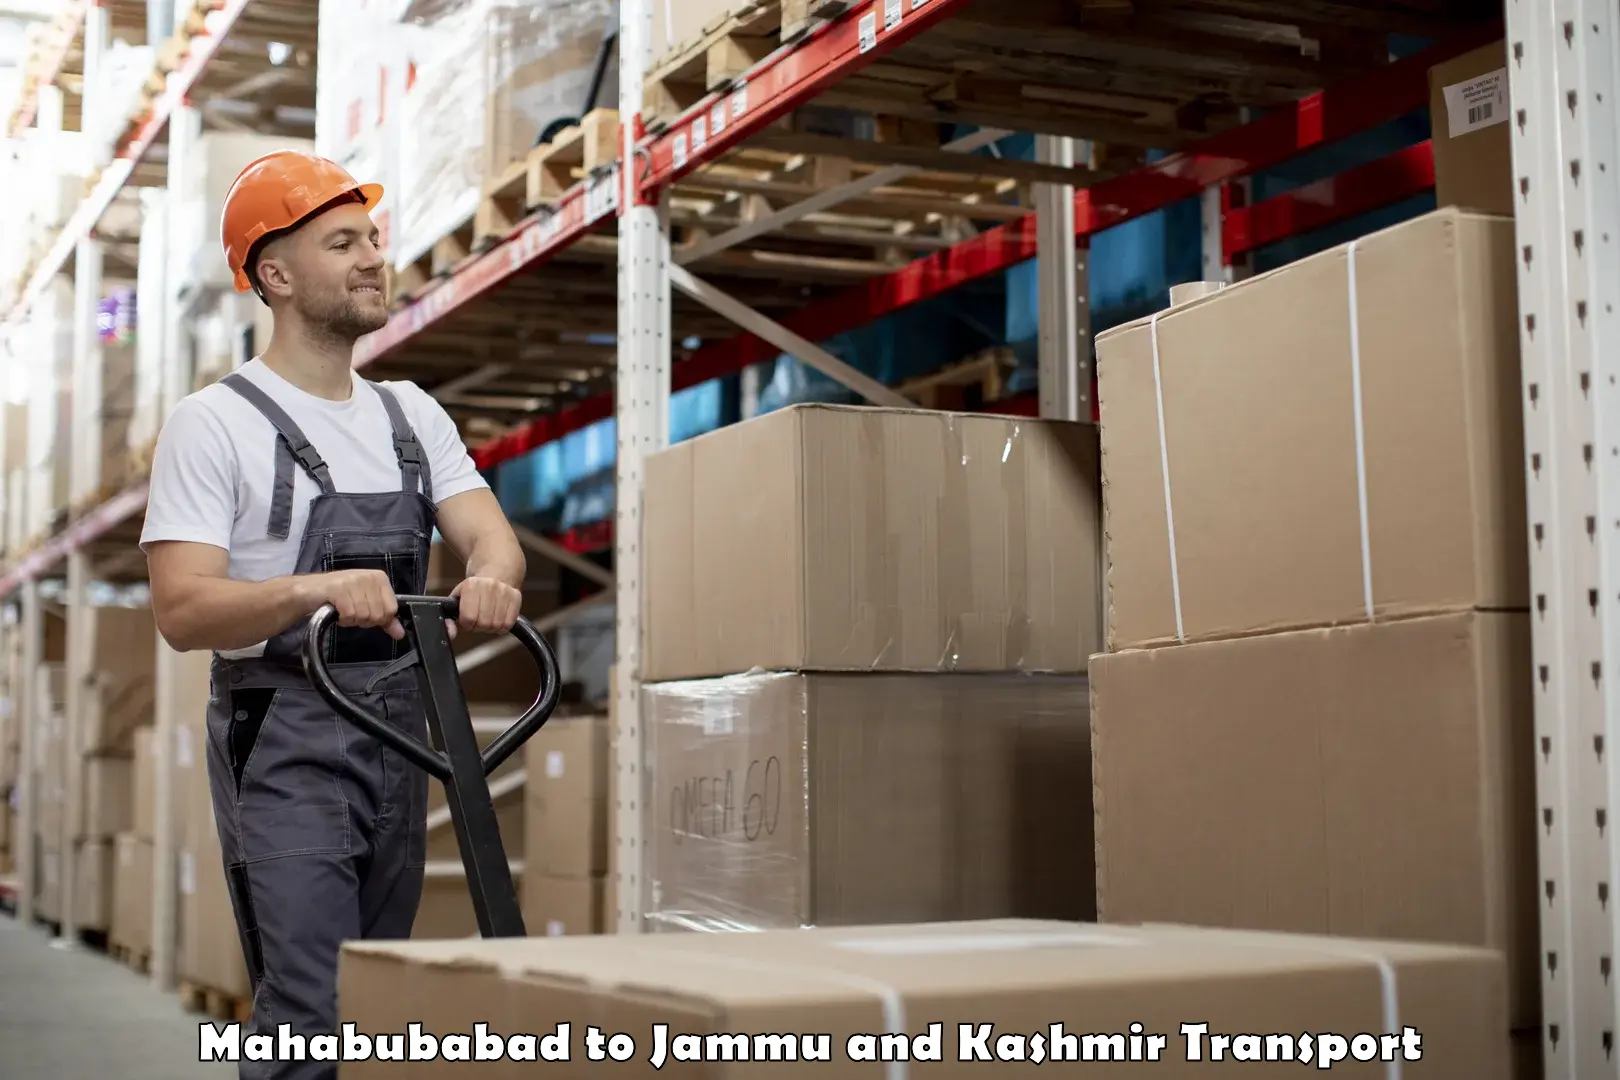 Commercial transport service Mahabubabad to Jammu and Kashmir